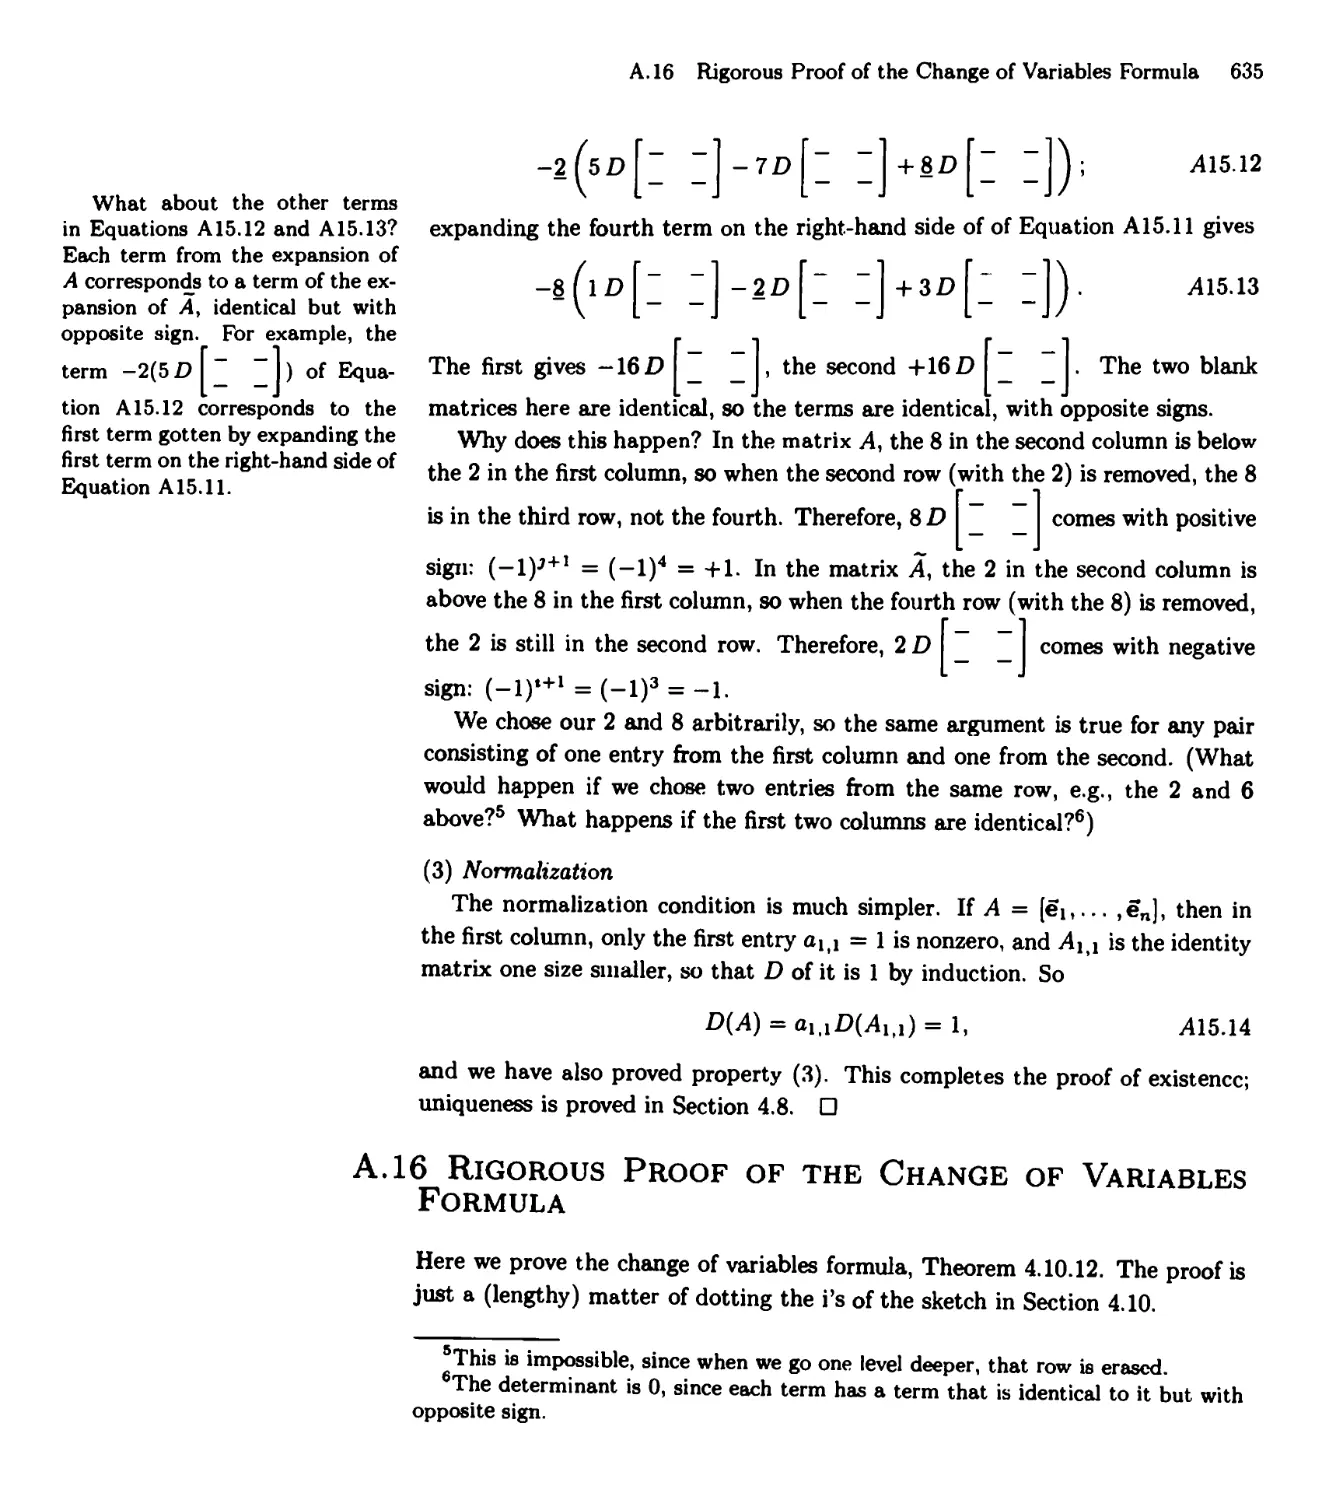 A. 16 Rigorous Proof of the Change of Variables Formula